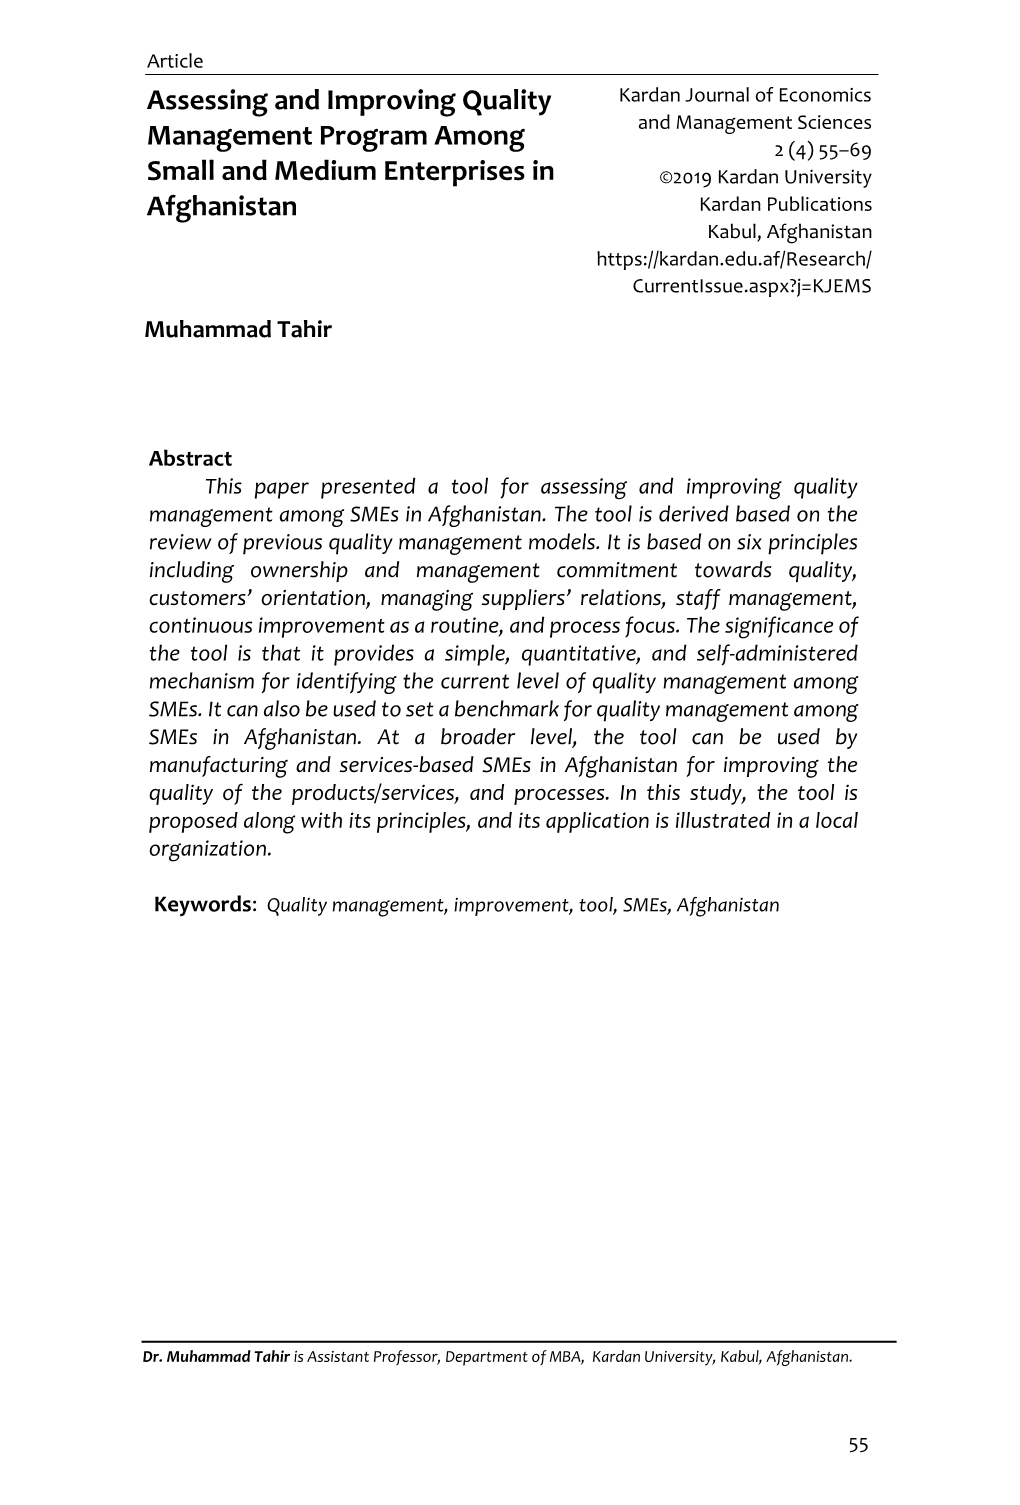 Assessing and Improving Quality Management Program Among